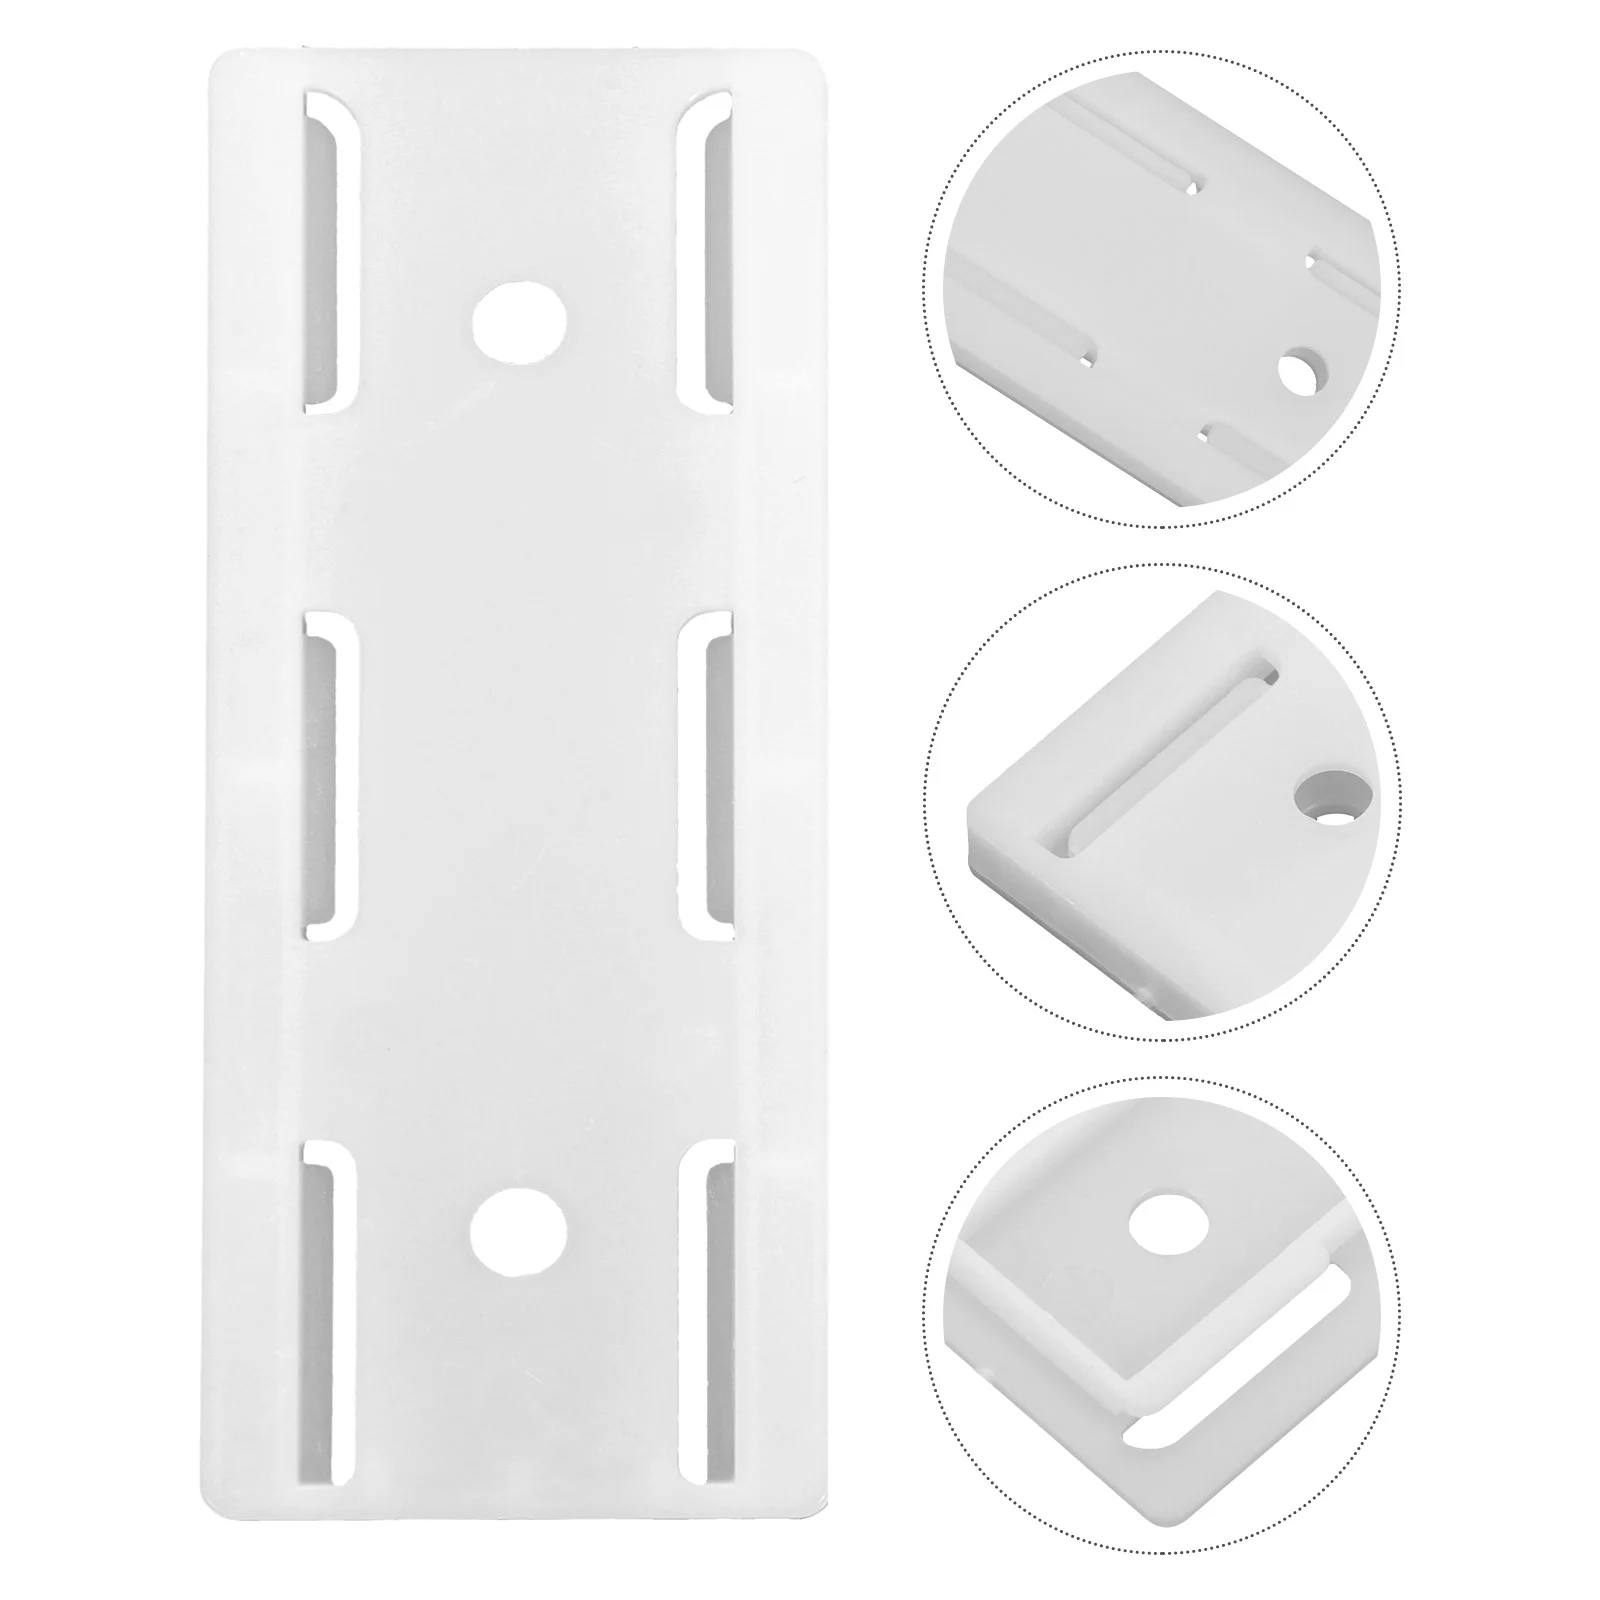 

10PCS ABS Row Socket Retainer Wall Hanging Socket Storage Holder Household Extension Socket Stand Punch Free Socket Fixer Wall